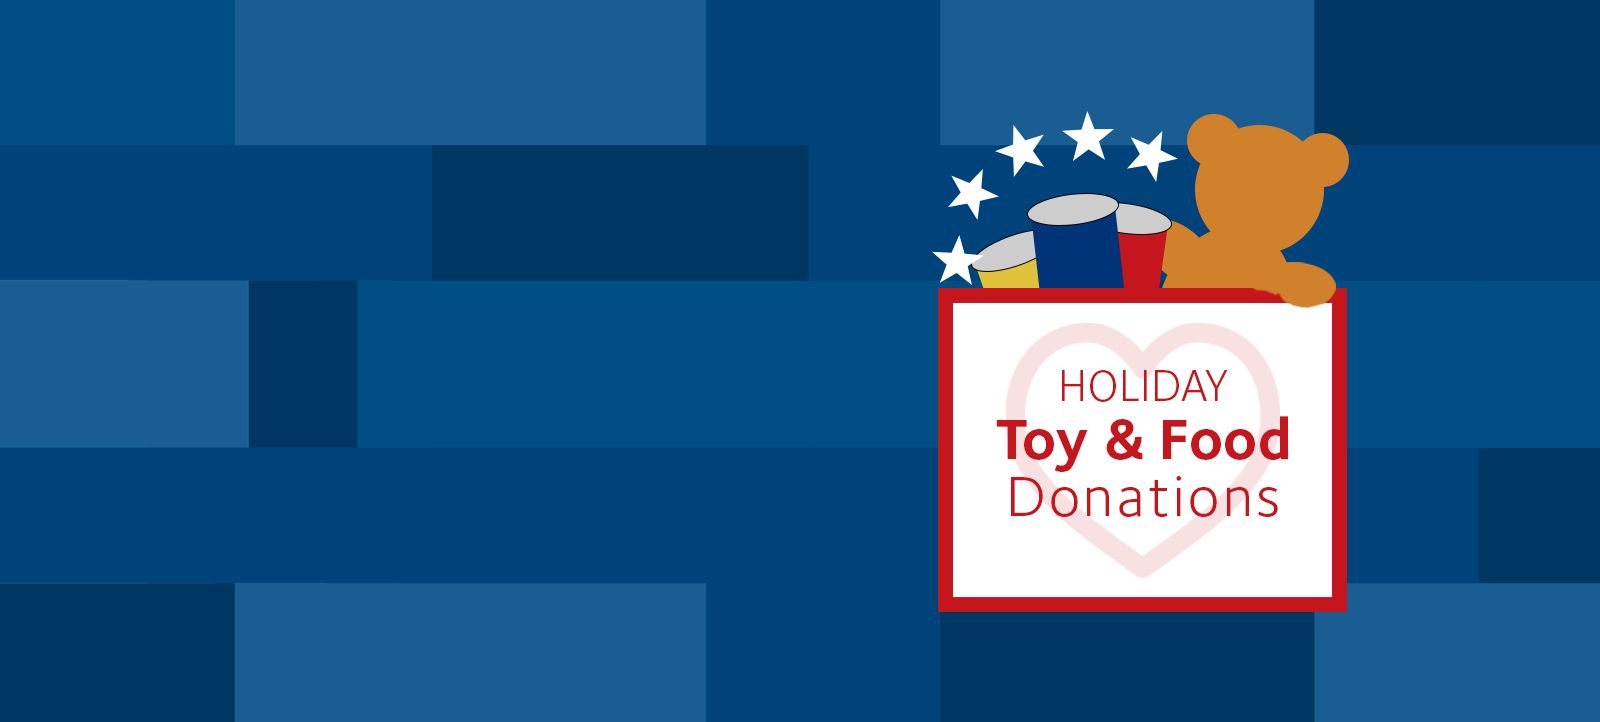 Holiday toy & food donations